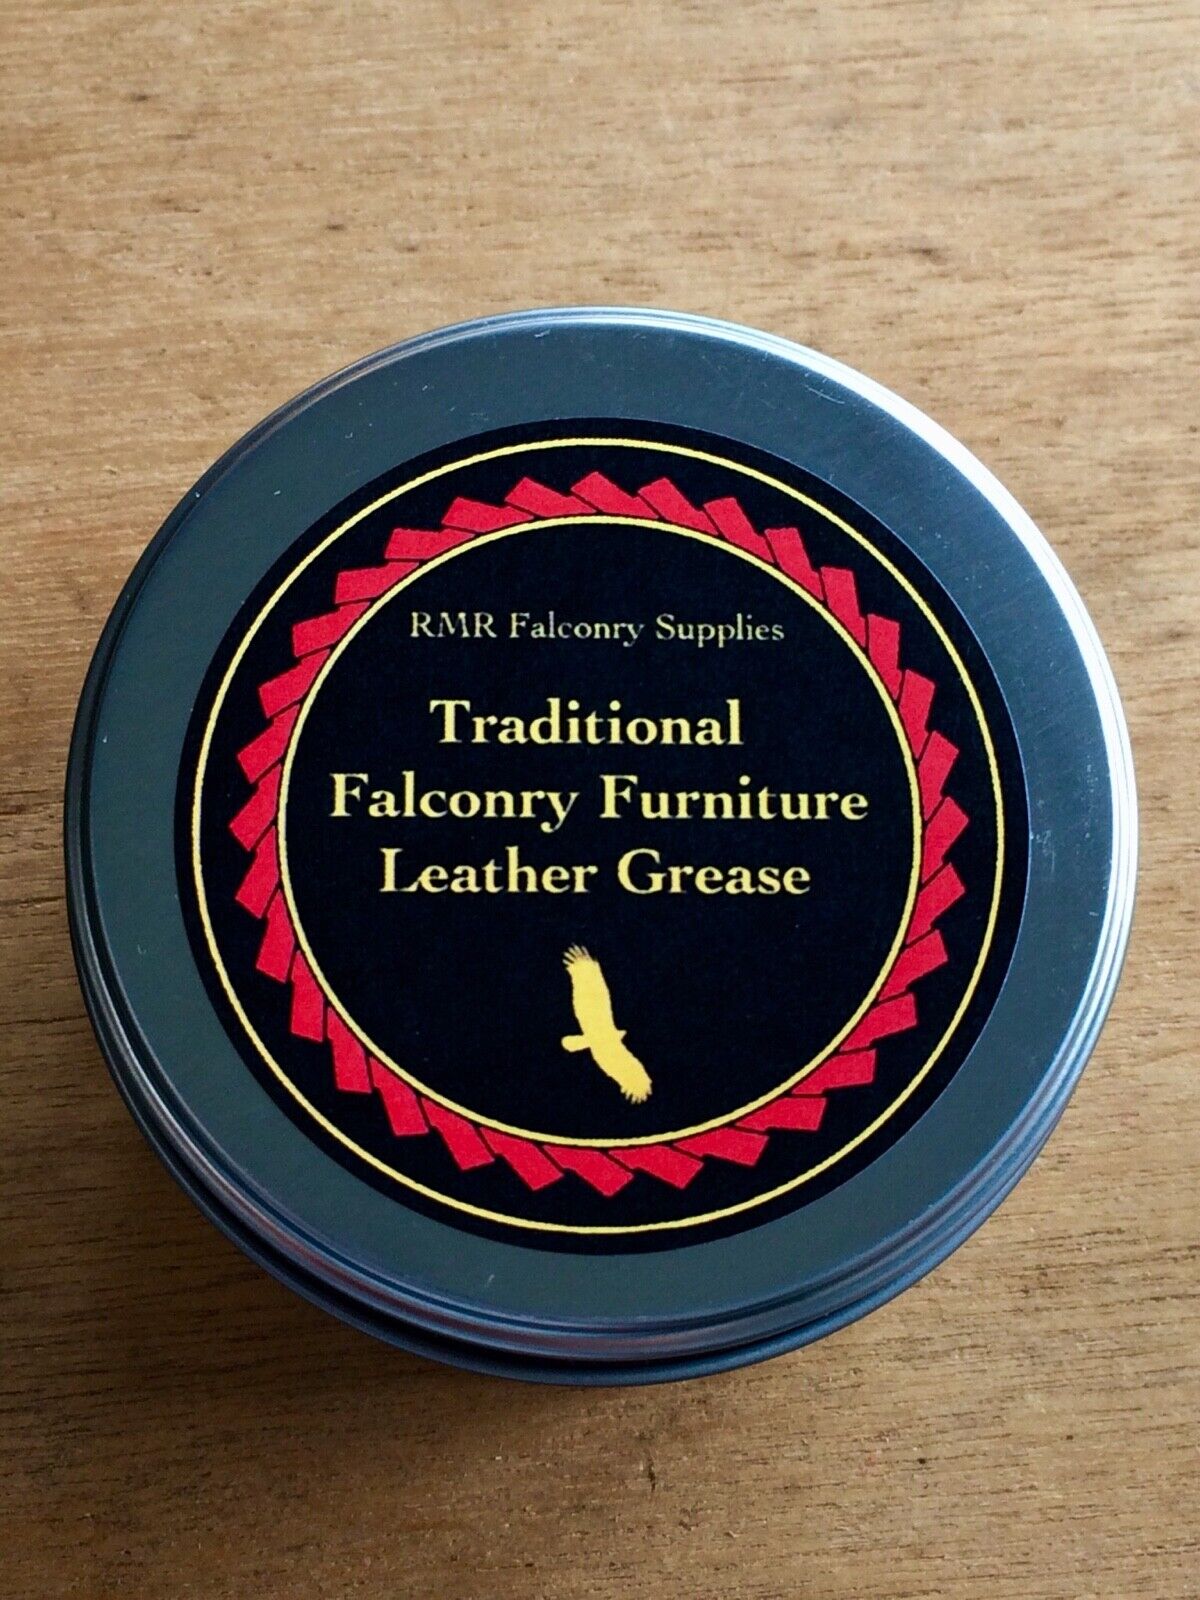 Falconry Furniture Traditional  Leather Grease 250ml Jesses / Anklets / Glove 